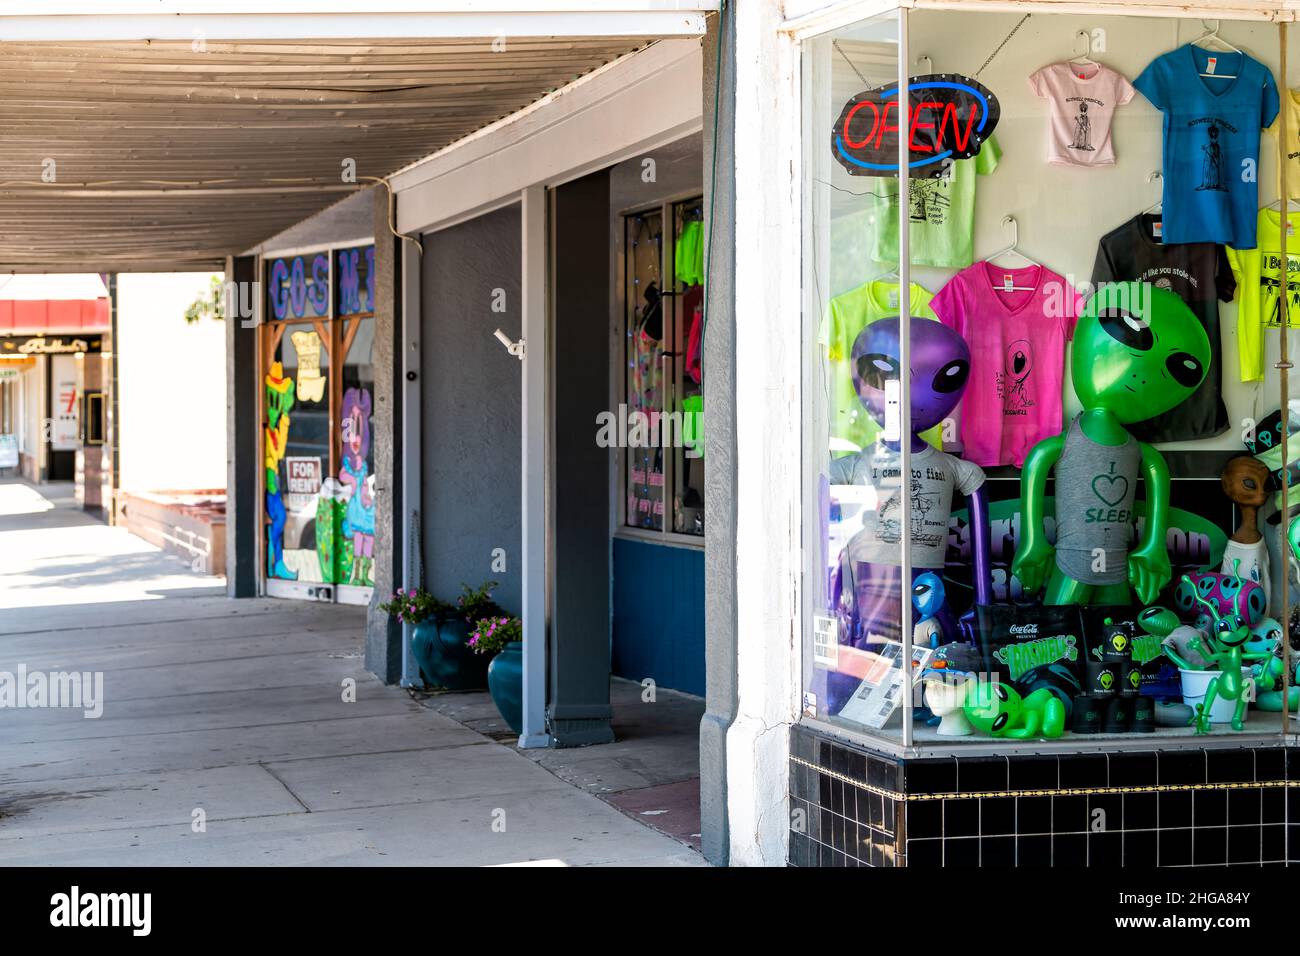 Roswell, USA - June 8, 2019: Main street road sidewalk pavement in New Mexico town with souvenir store shop and alien ufo objects on display Stock Photo